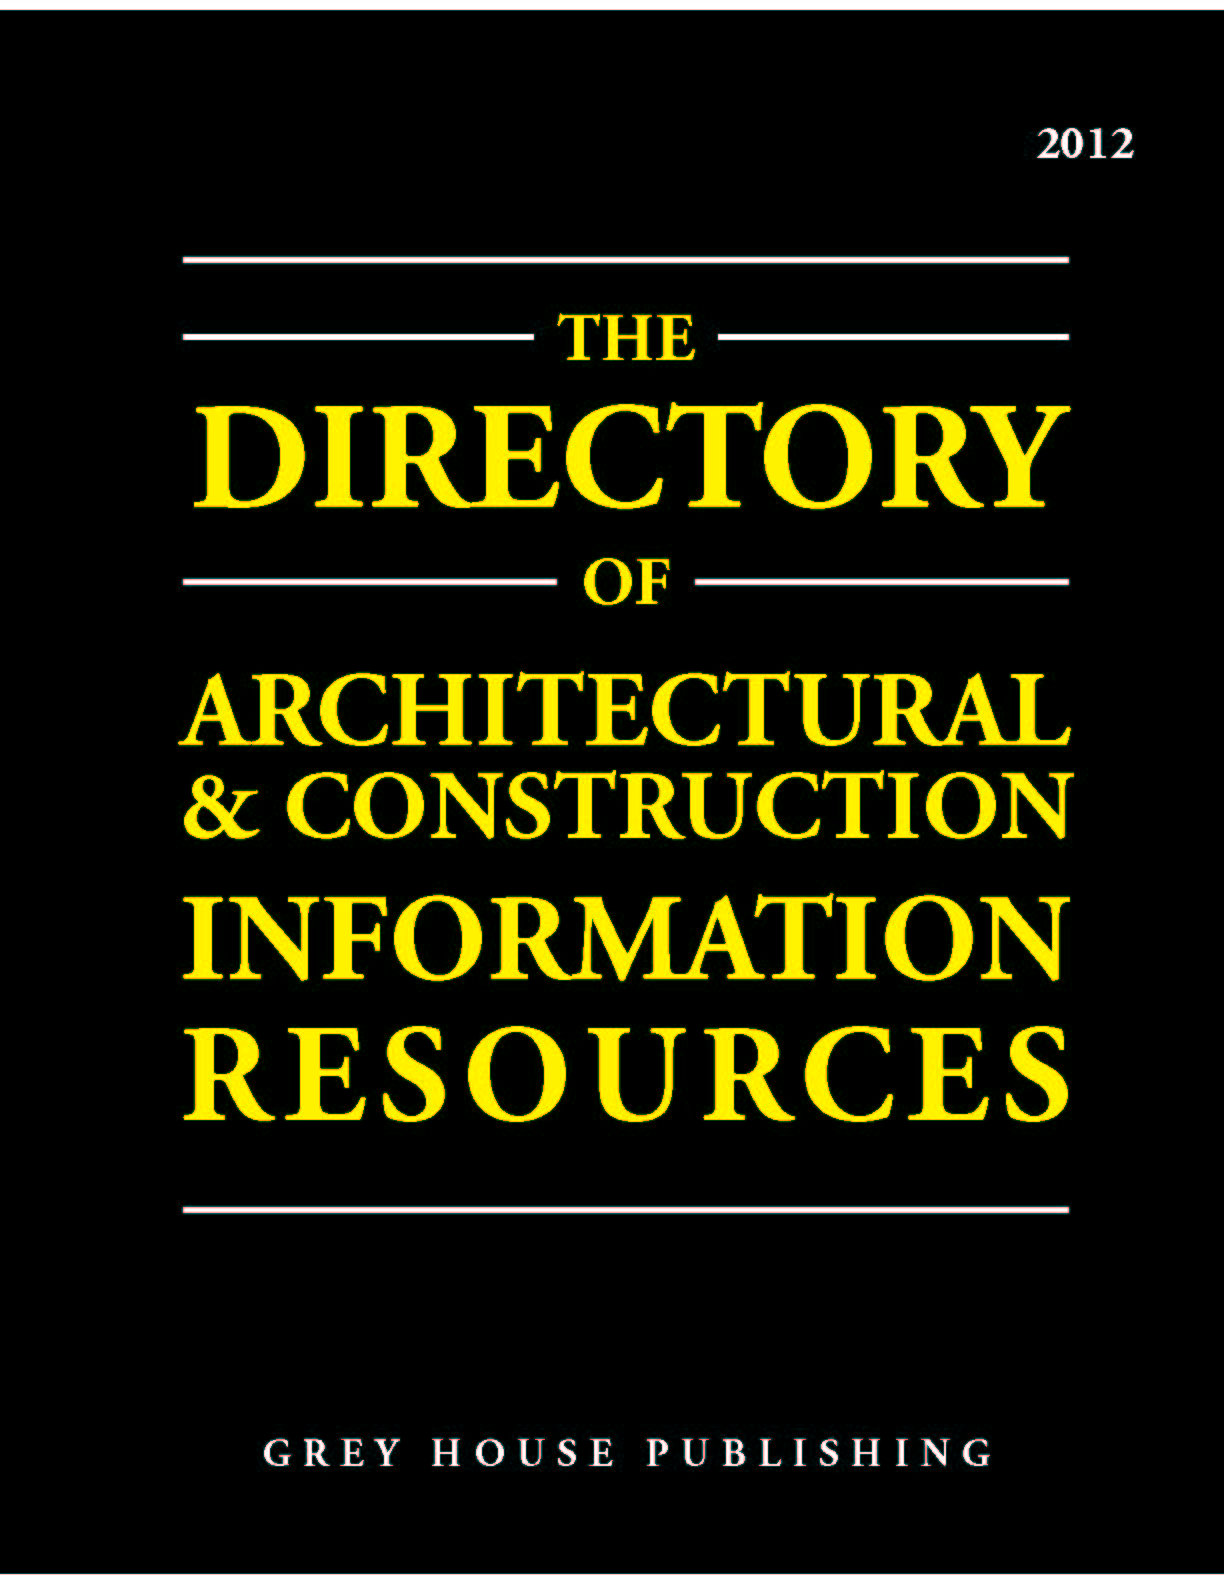 Directory of Architectural & Construction Information Resources